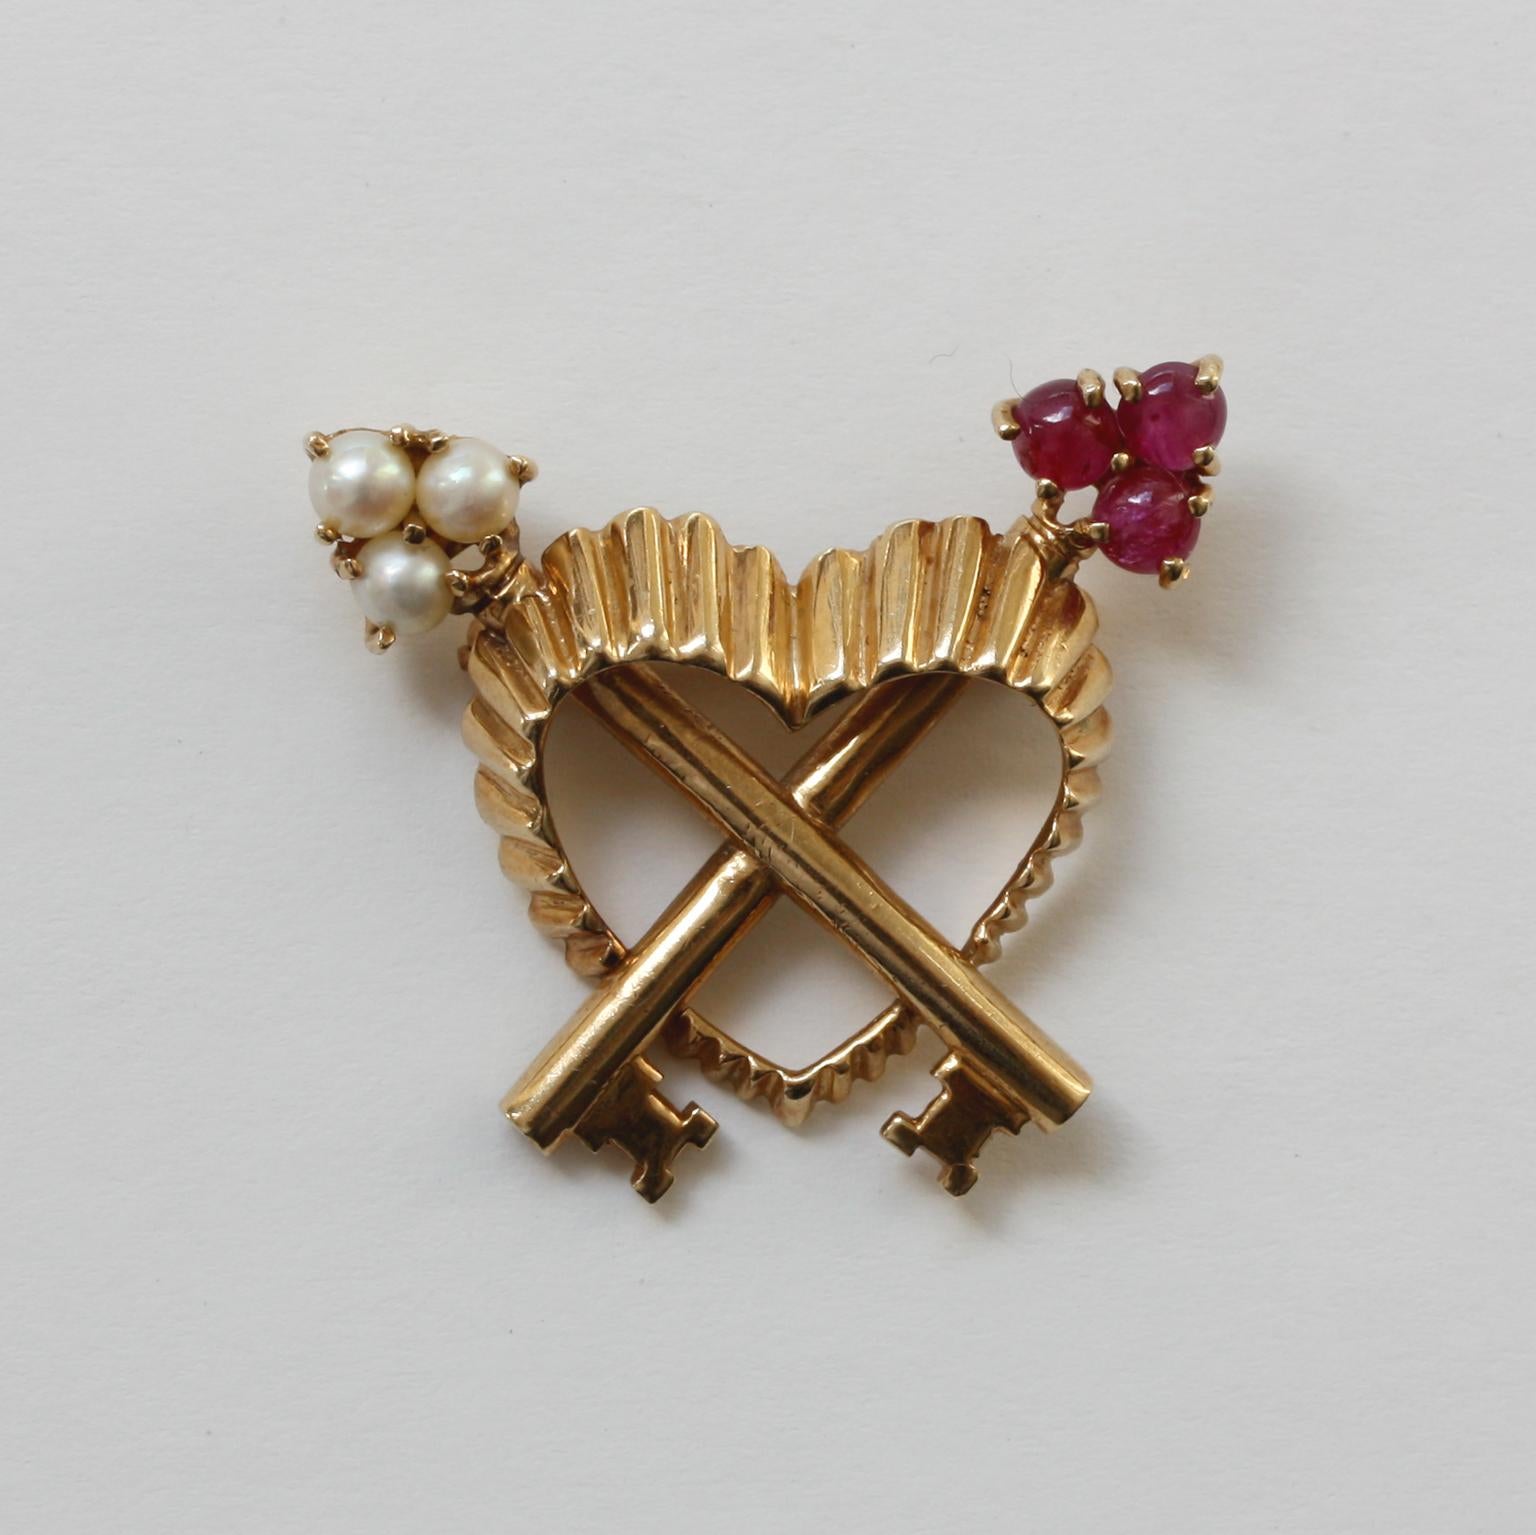 An 18 carat gold brooch in the shape of a heart with two keys across, one set with cabochon cut rubies and the other with half pearls, France, circa 1960 (this brooch can also be made into a pendant eaily).

weight: 7.70 grams
dimensions: 3.3 x 2.9